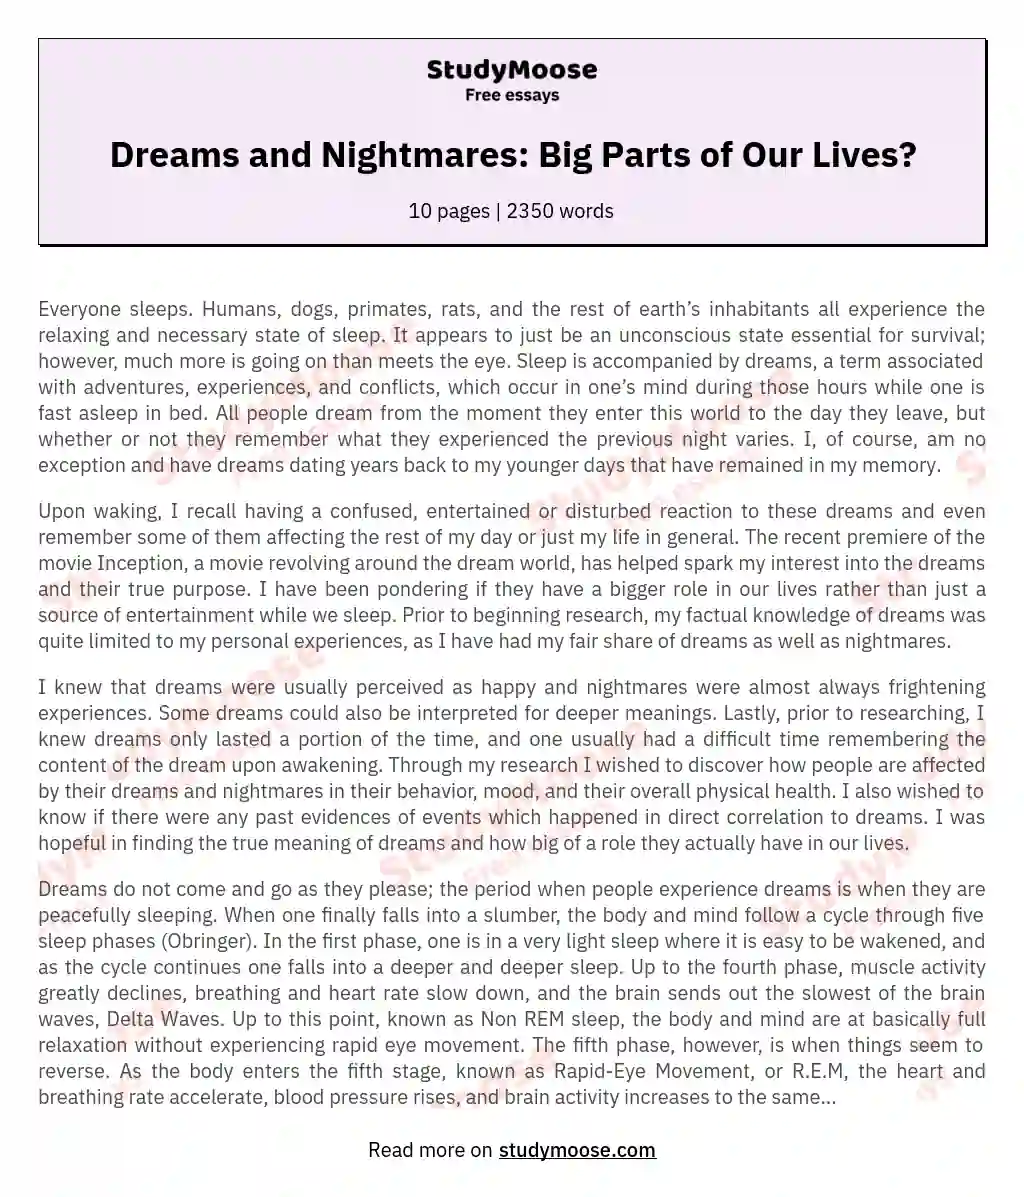 Dreams and Nightmares: Big Parts of Our Lives? essay